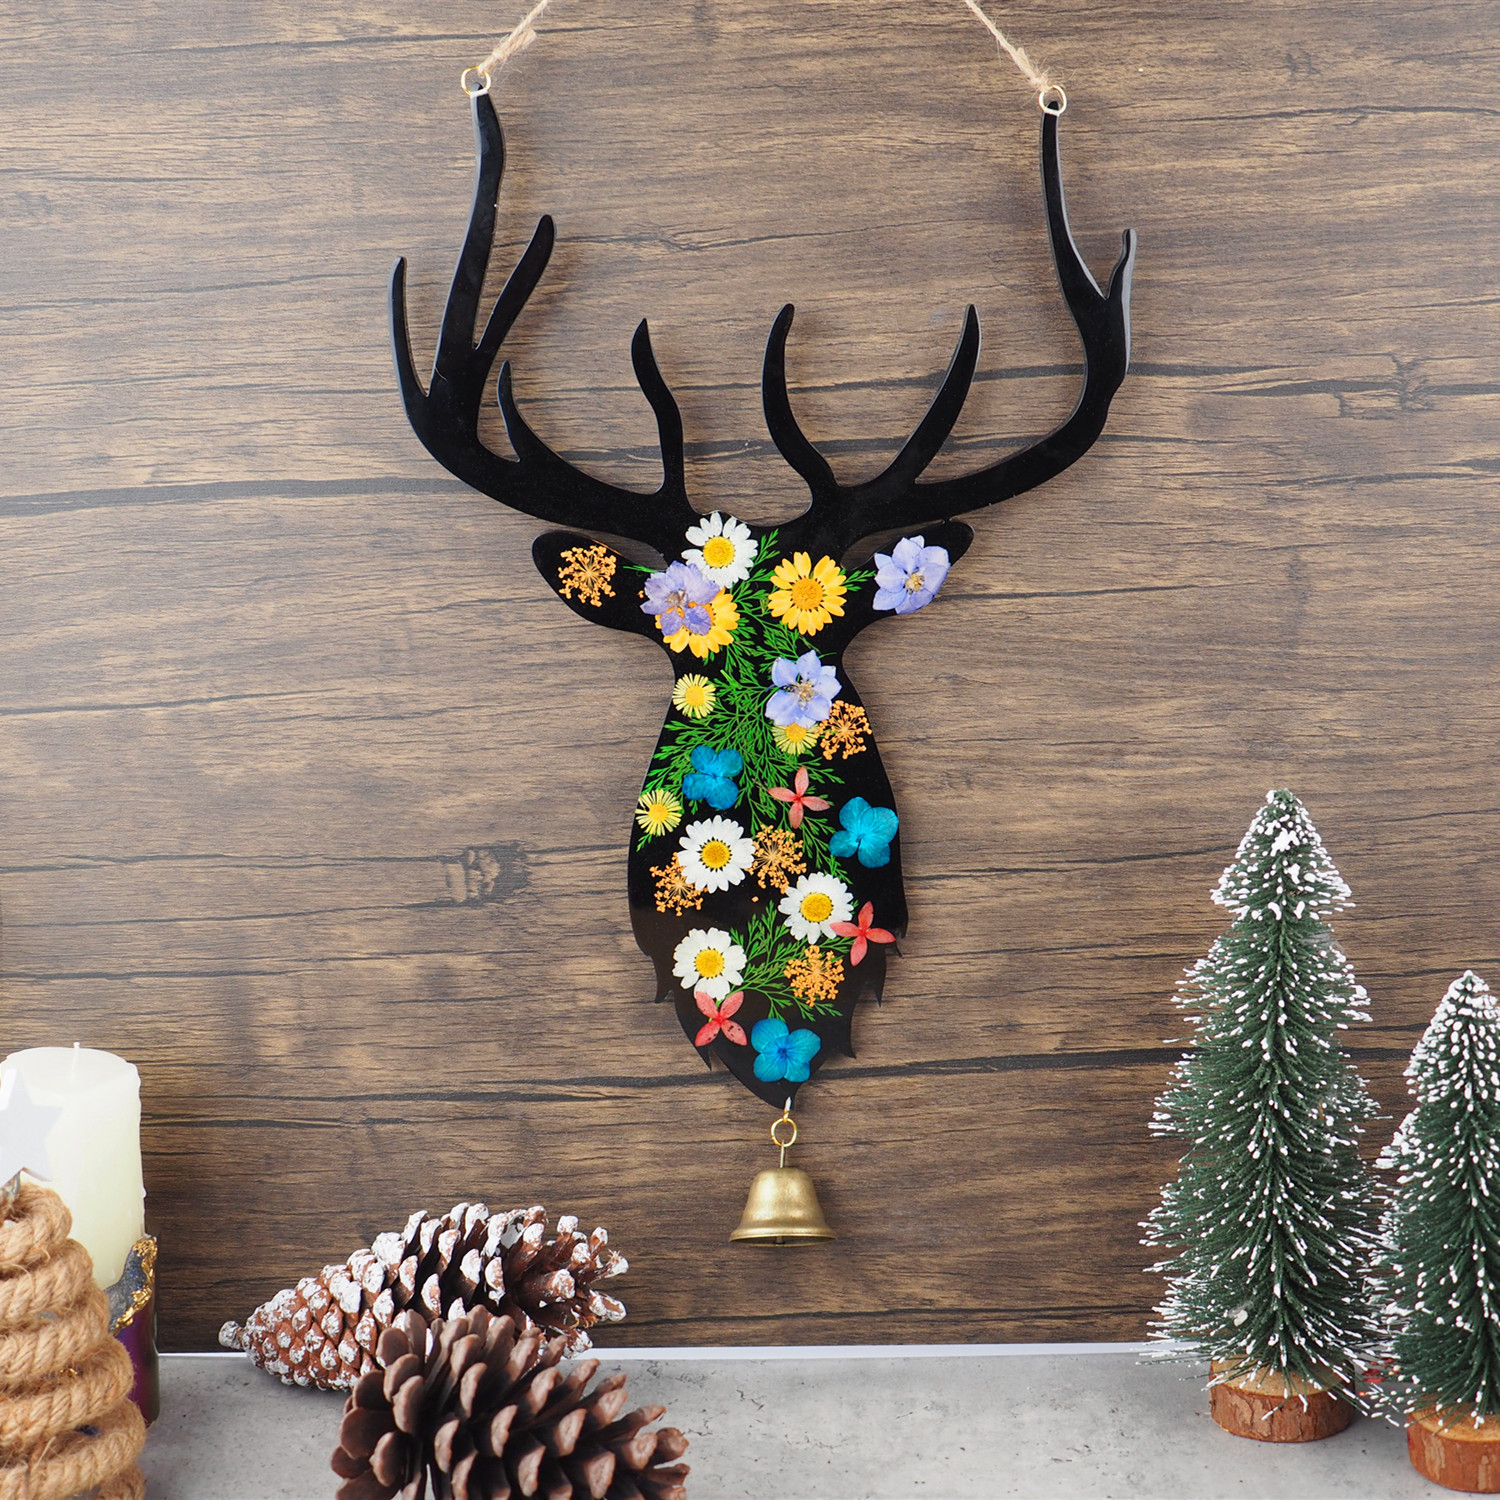 Reusable Resin Silicone Deer Head Mold with Antler for Wall Deco Door Trim House Ornament